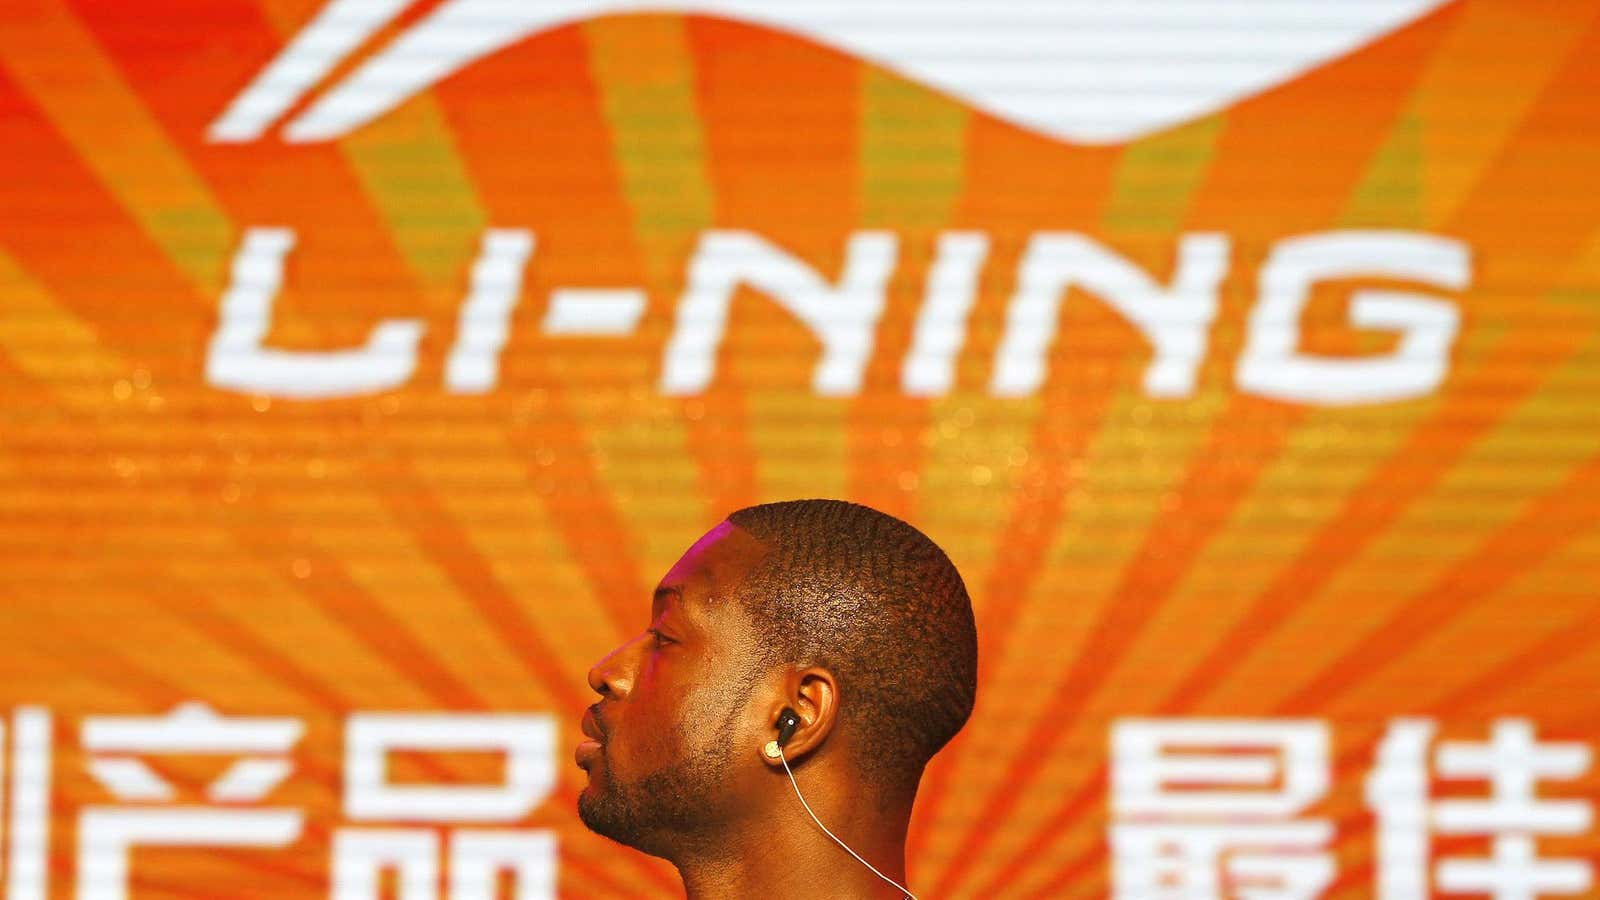 China’s Li Ning sportswear brand may be too troubled for even Dwyane Wade to save